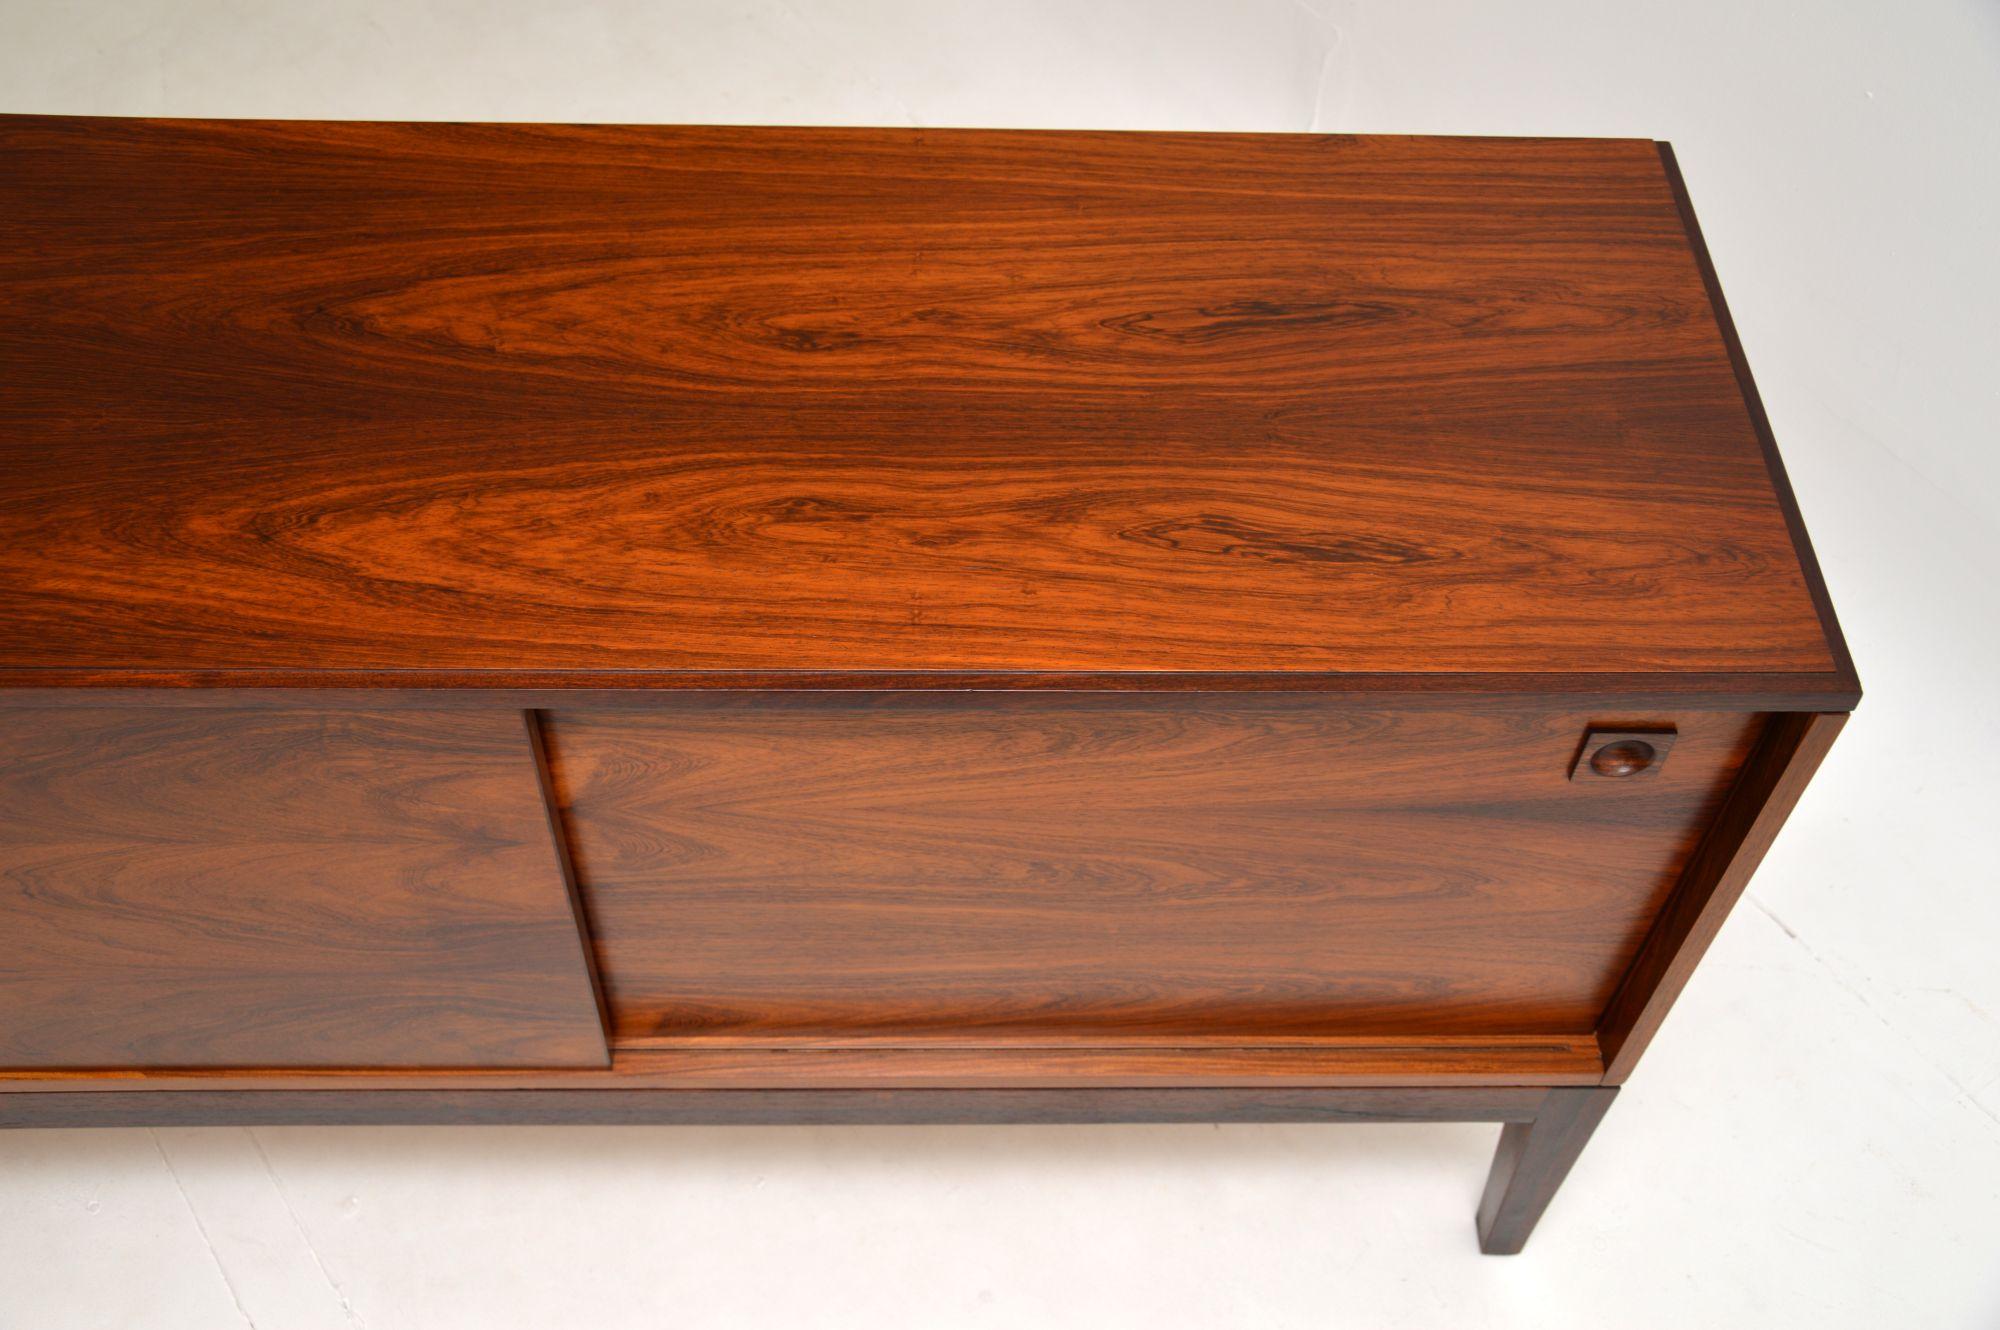 Wood Vintage Sideboard by Robert Heritage for Archie Shine For Sale